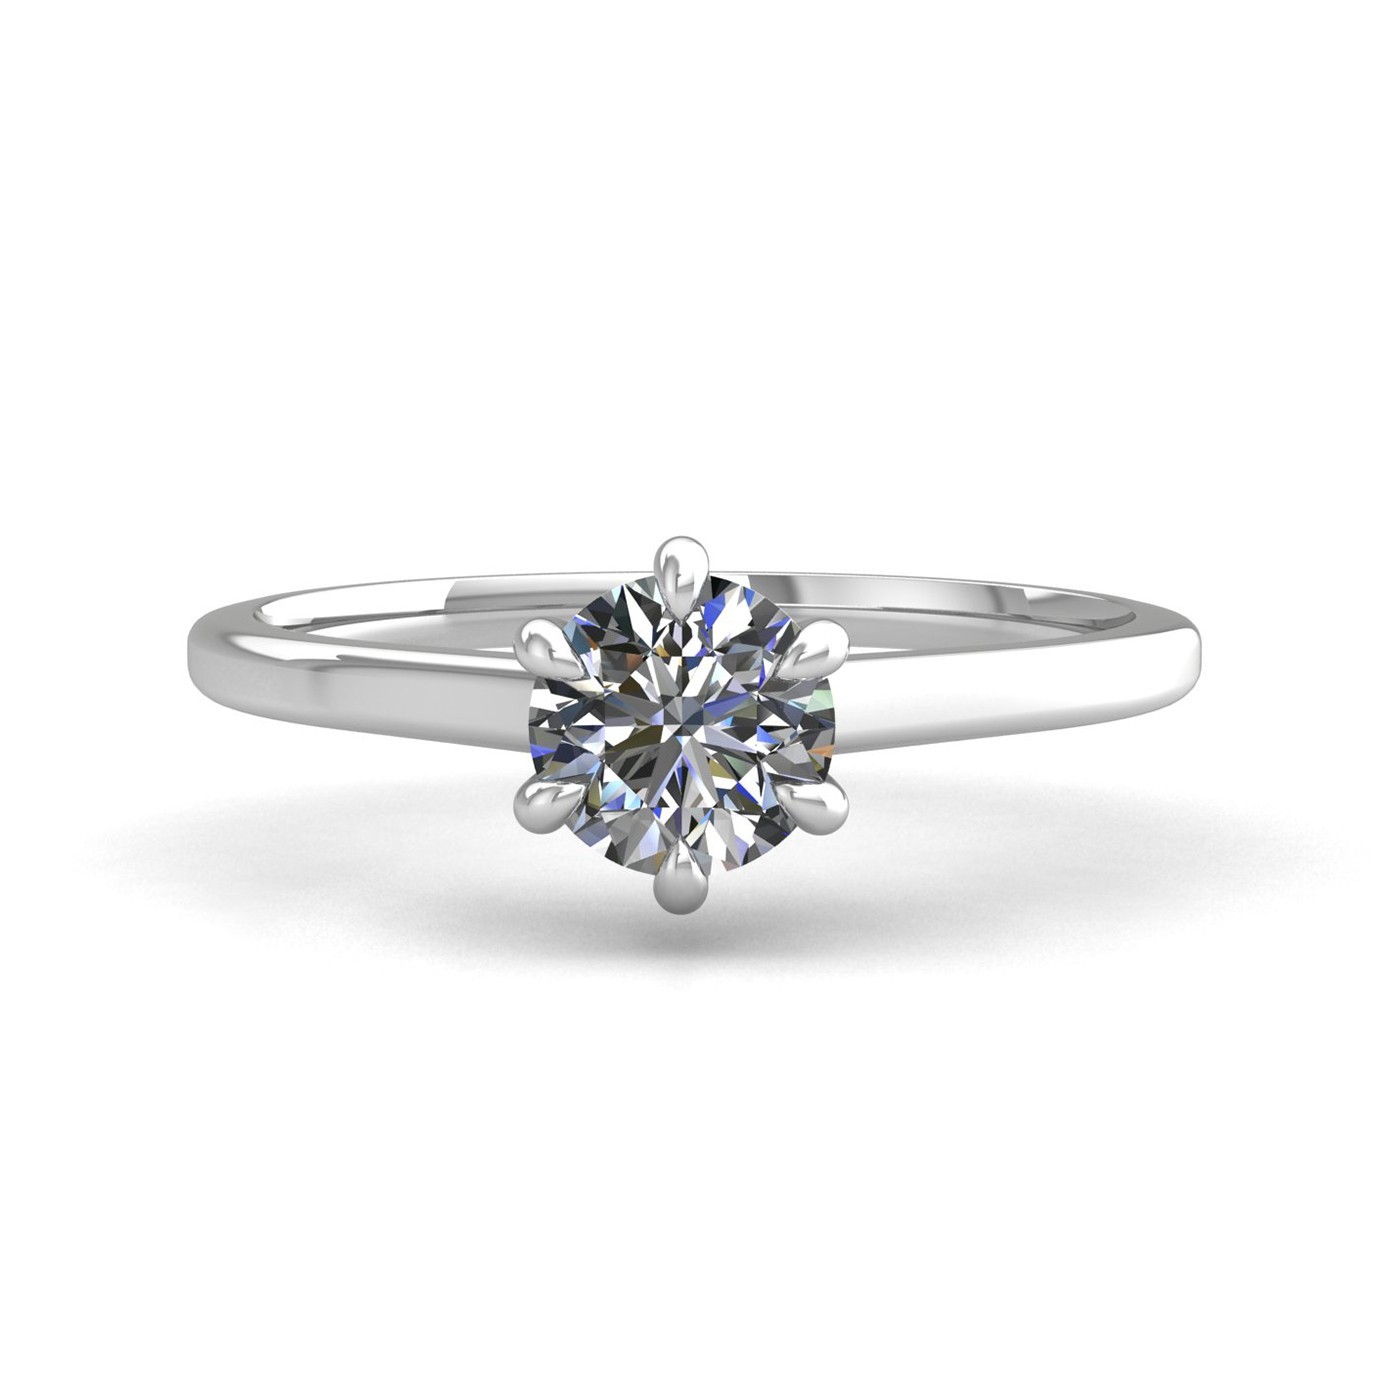 18k white gold 0,30 ct 6 prongs solitaire round cut diamond engagement ring with whisper thin band Photos & images